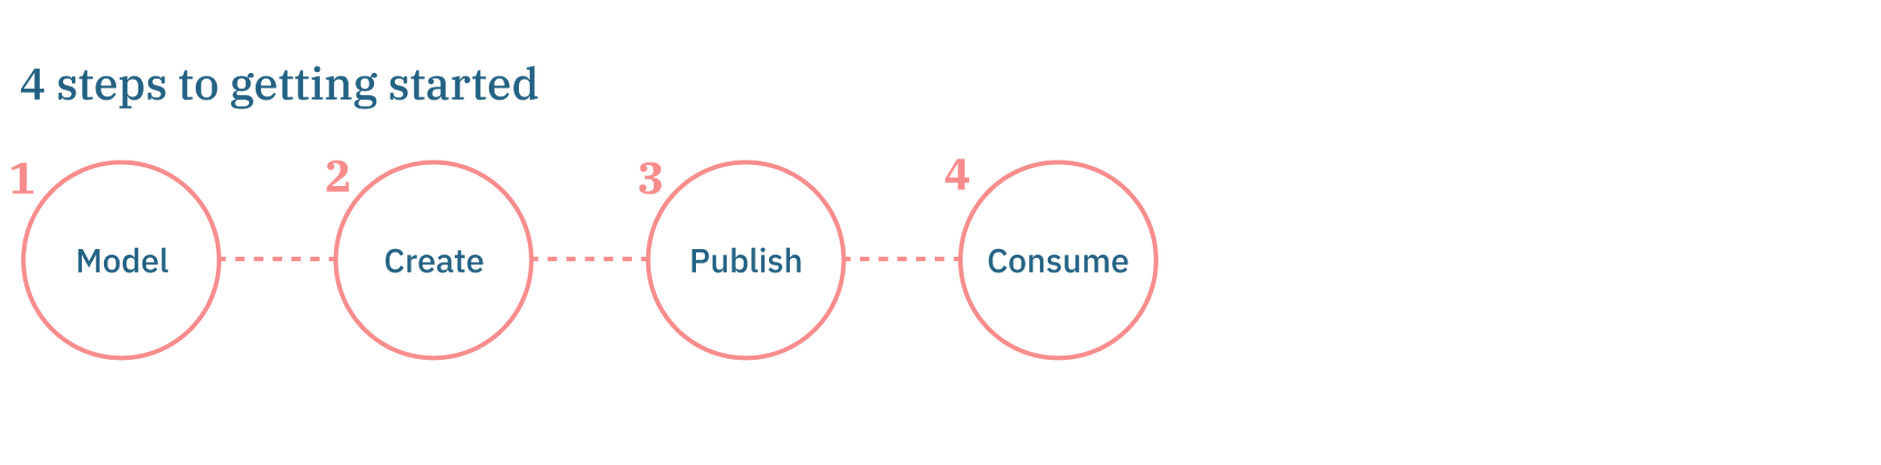 4 steps to getting started: Model, Create, Publish, Consume.